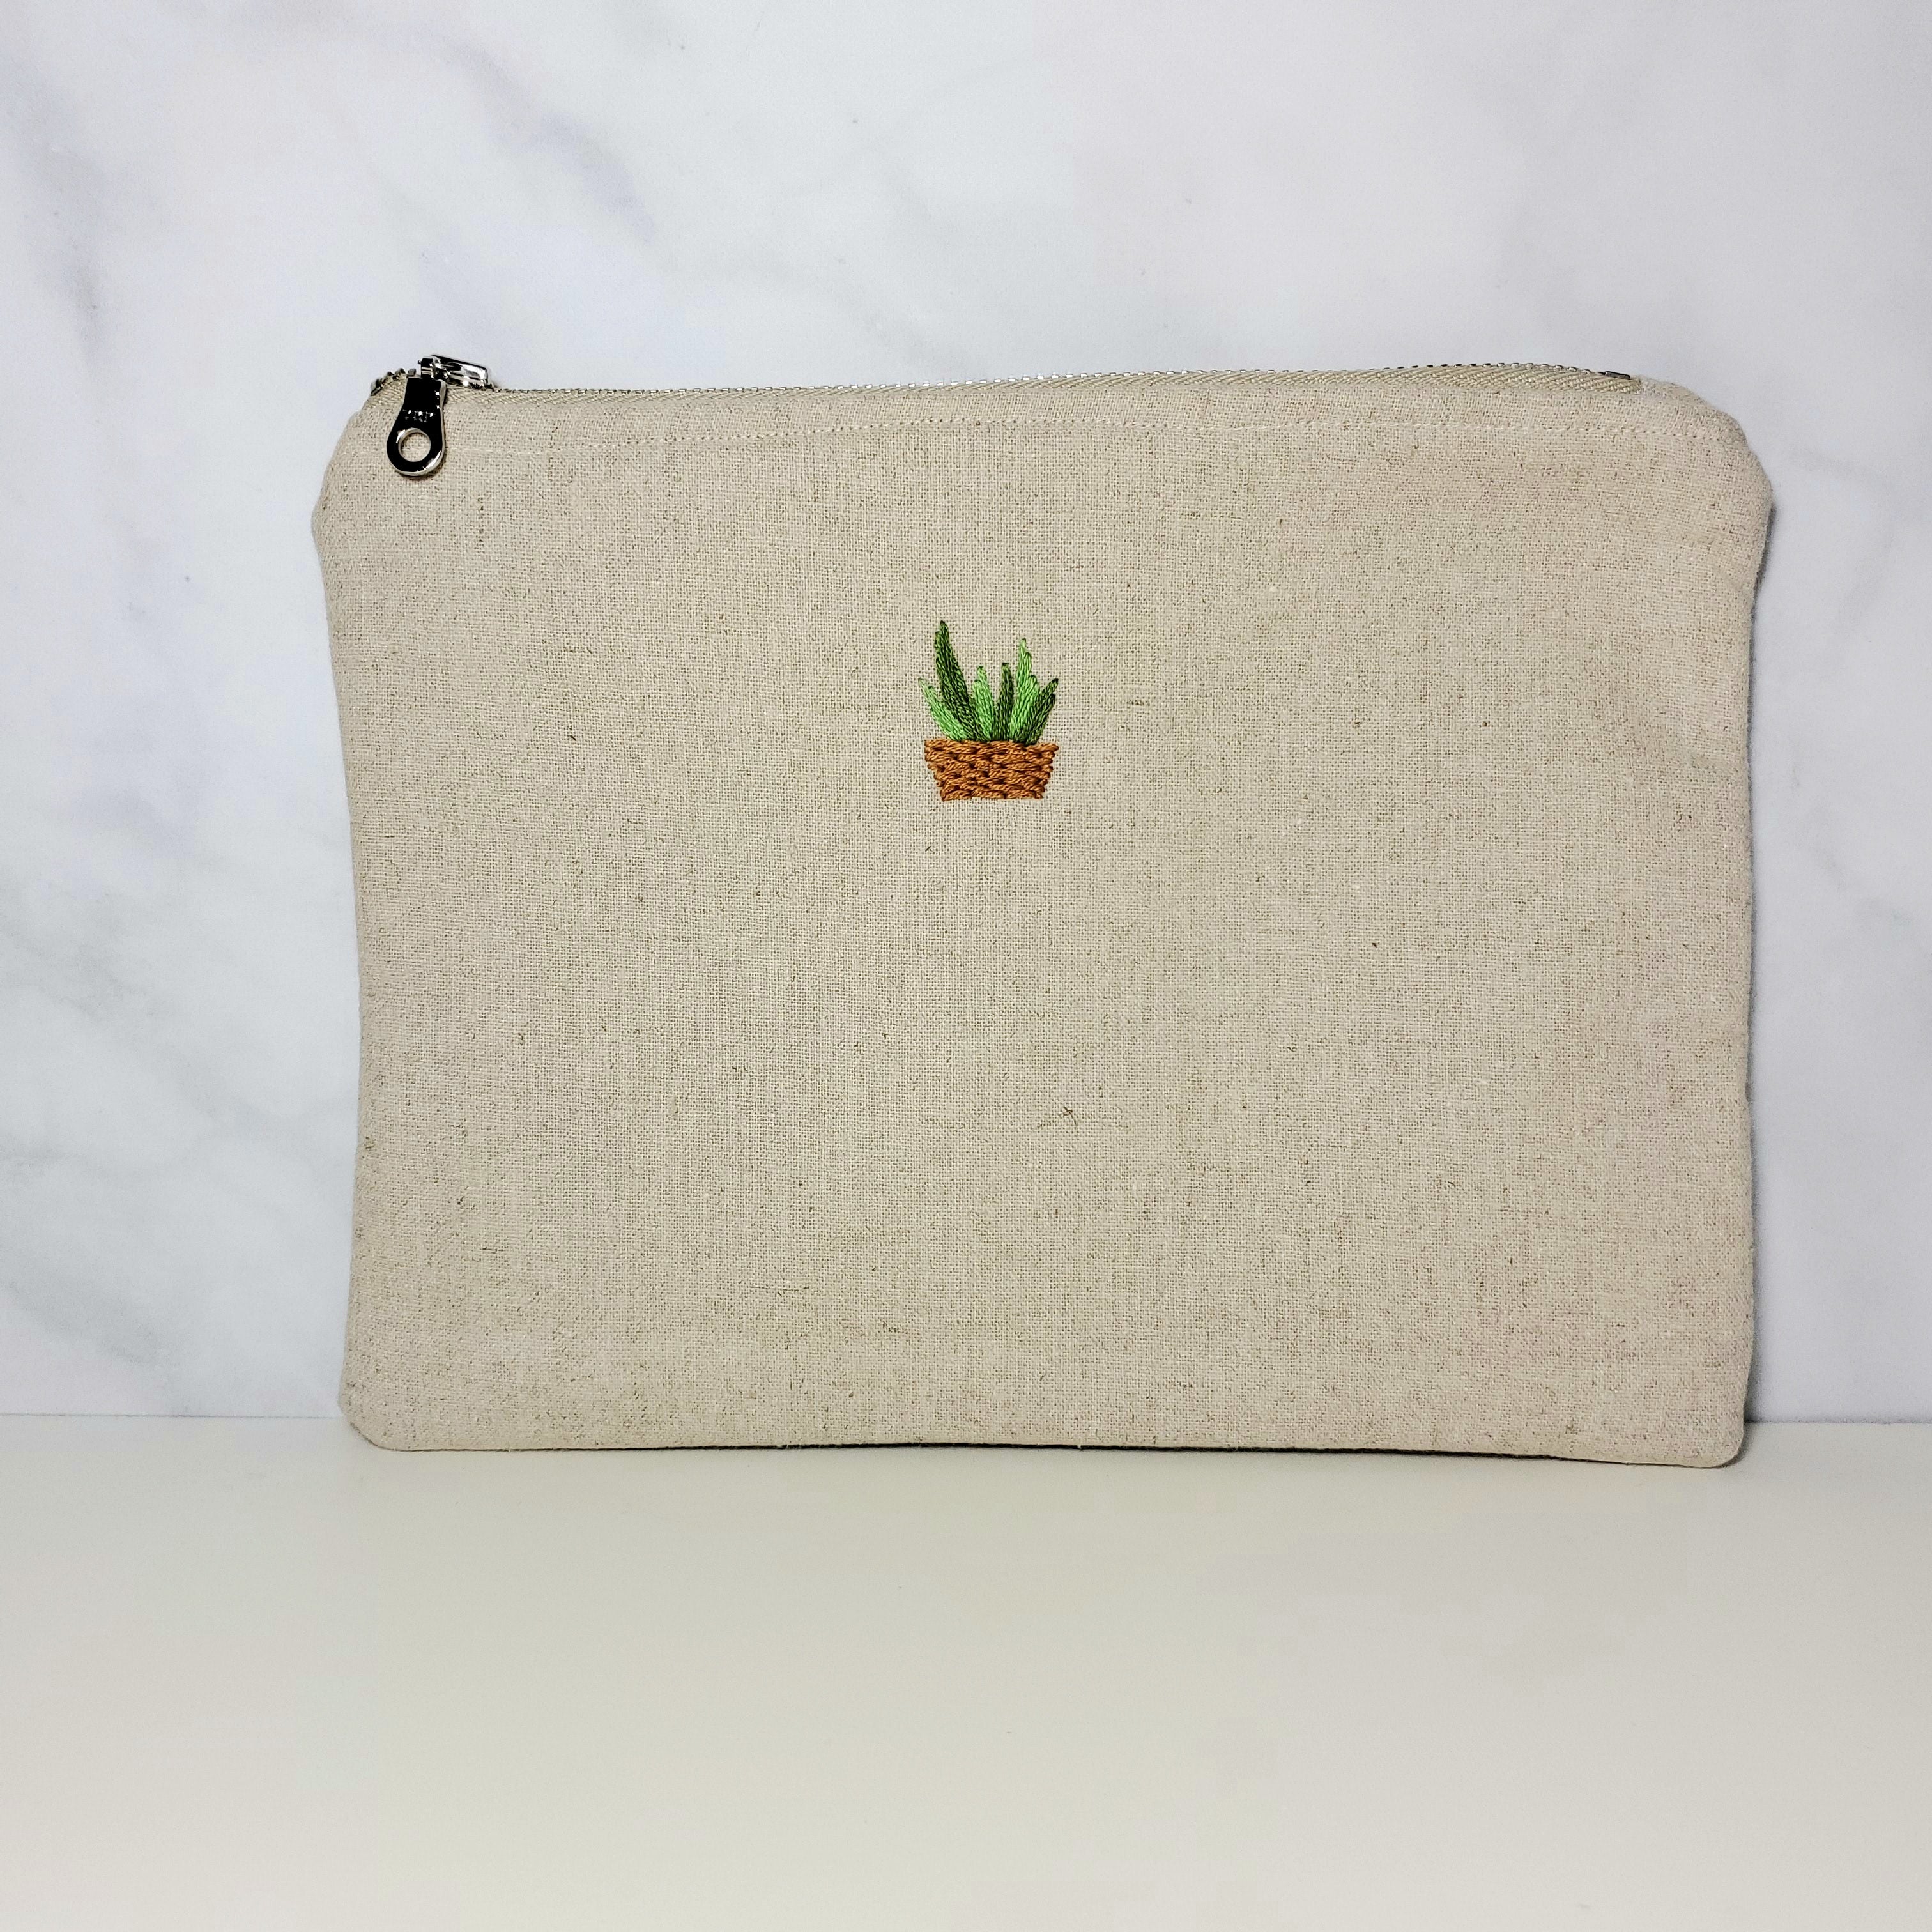 Hand Embroidered Zipper Pouch - Cactus (C)